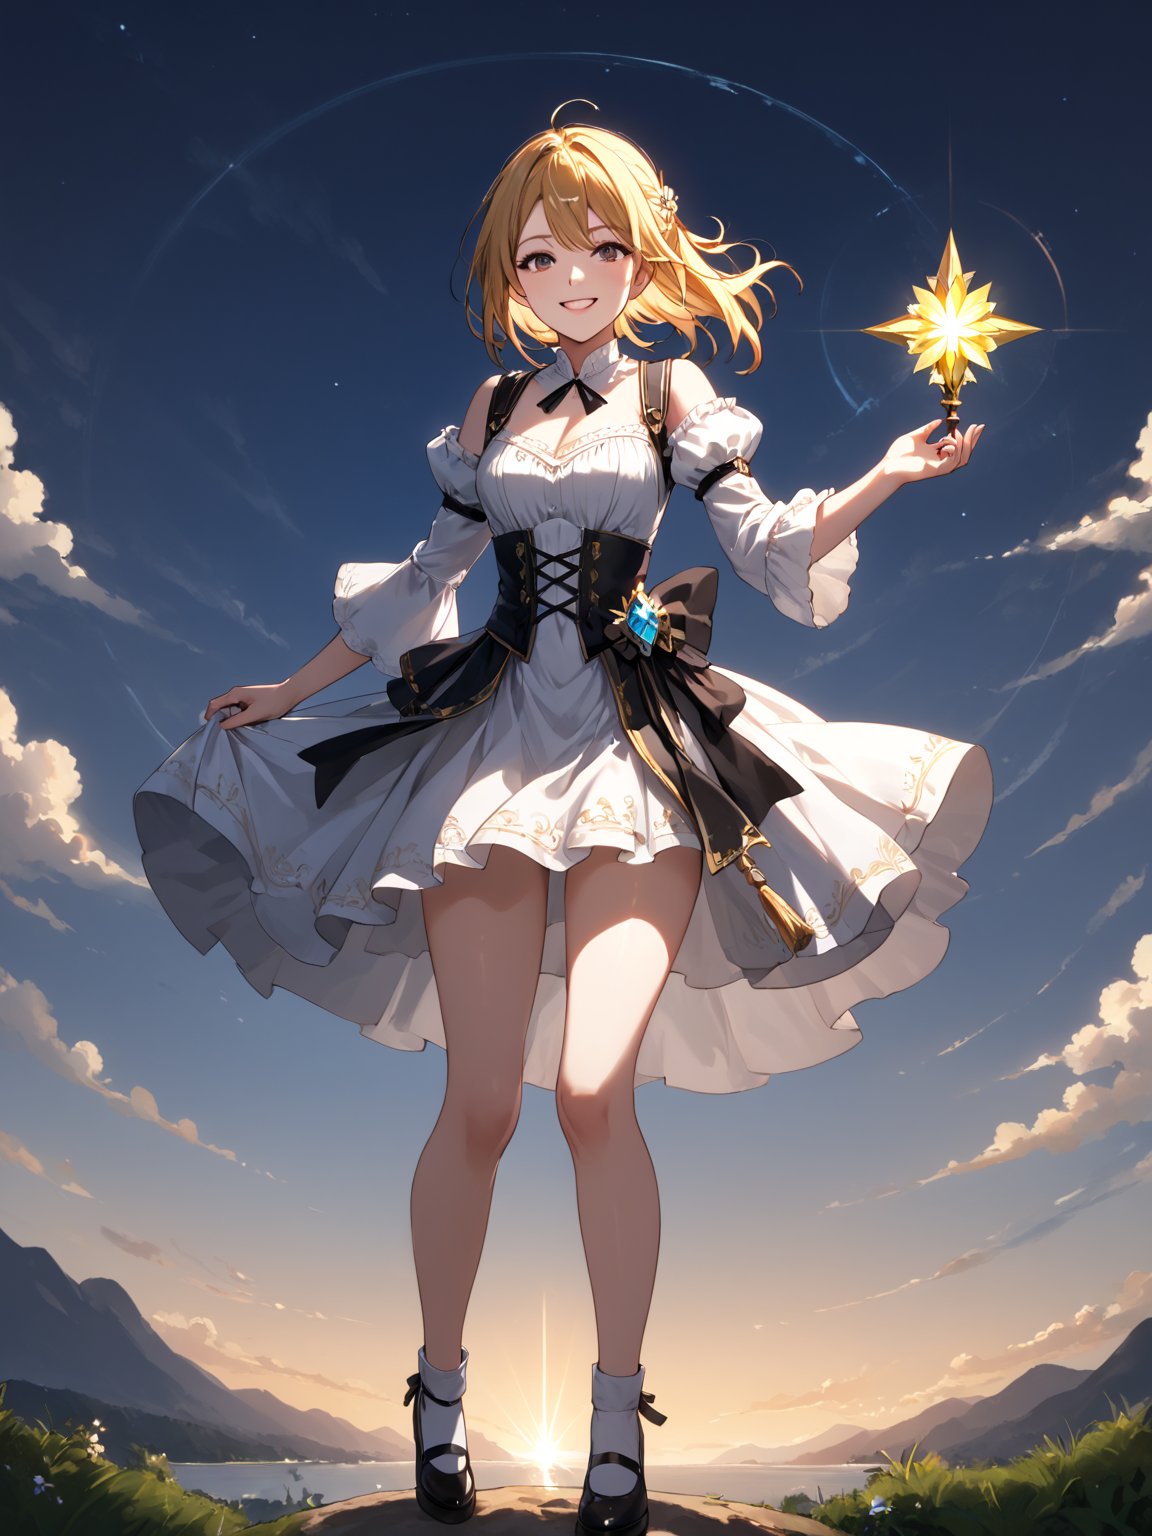 masterpiece, best quality, highres
,//Character, 
1girl, solo
,//Fashion, 
,//Background, white background
,//Others, ,Expressiveh, 
,AobaTsukuyo,
The girl standing triumphantly atop a hill, silhouetted against a beautiful sunset. She's holding a magical artifact that glows with rainbow colors. Her posture is confident, and a smile of accomplishment lights up her face. Fireflies dance around her, adding a magical touch to the scene.